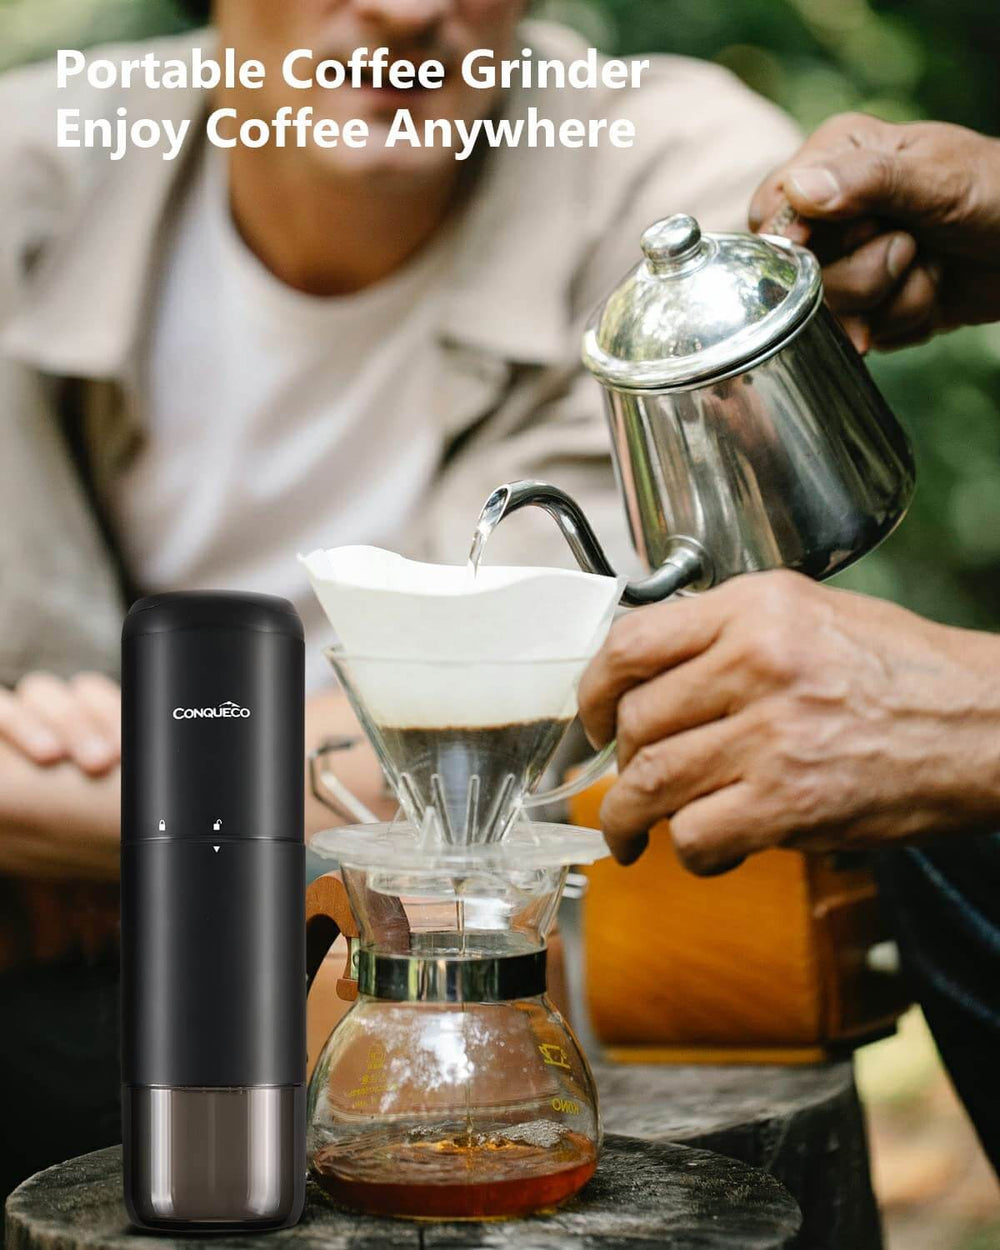 Portable Coffee Maker, Rechargeable Mini Portable Pocket Coffee